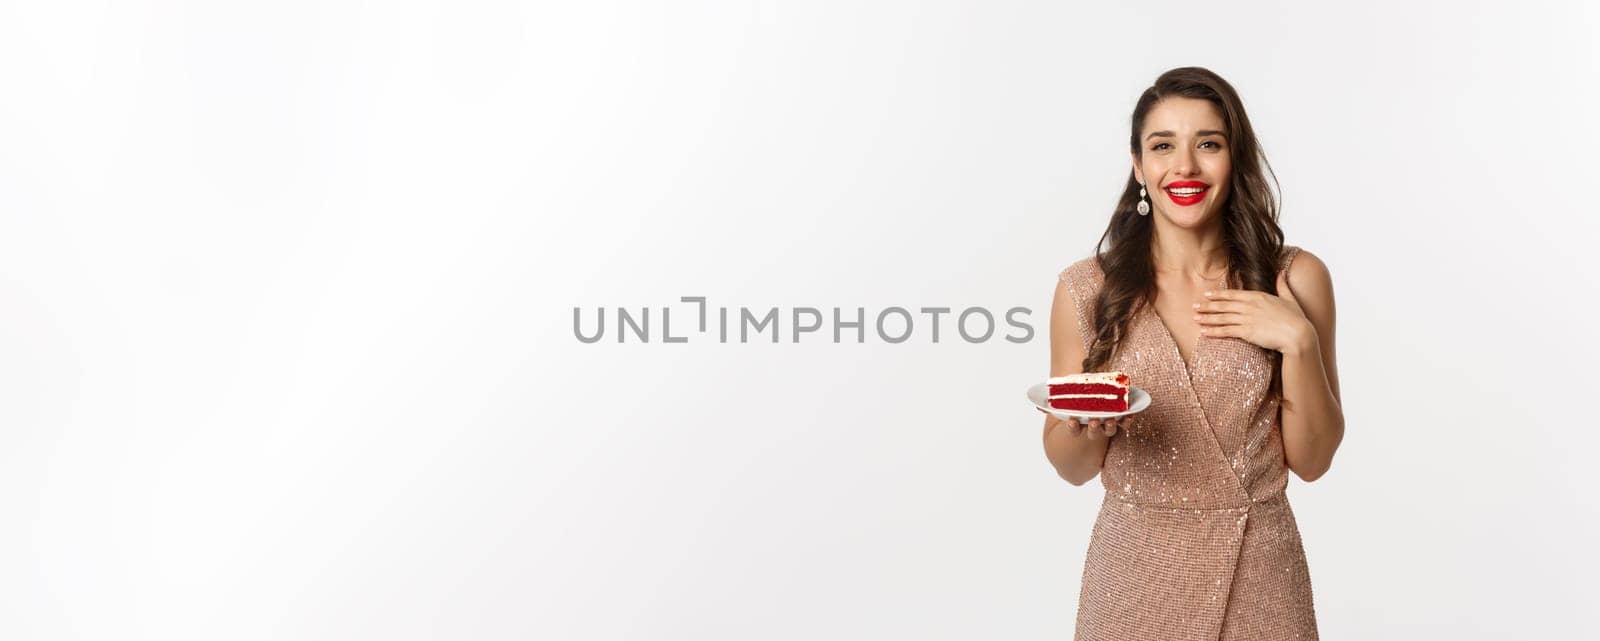 Party and celebration concept. Attractive slim woman in elegant dress holding piece of cake and smiling, standing over white background.